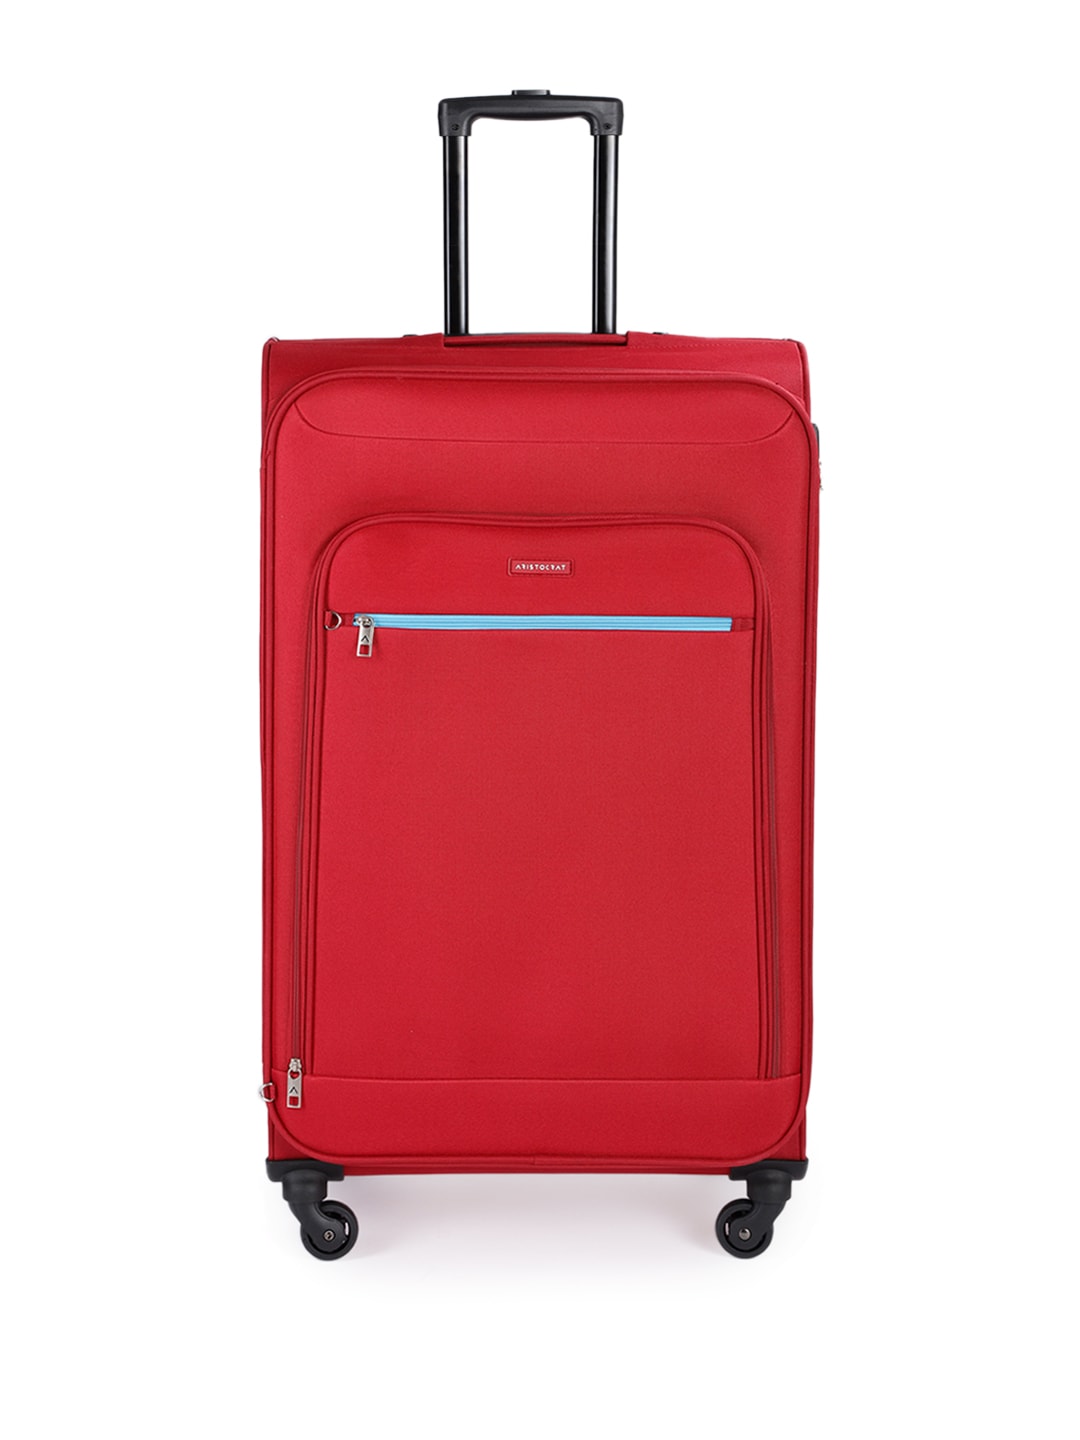 Aristocrat Red Solid NILE 4W EXP 76 Large Trolley Suitcase Price in India